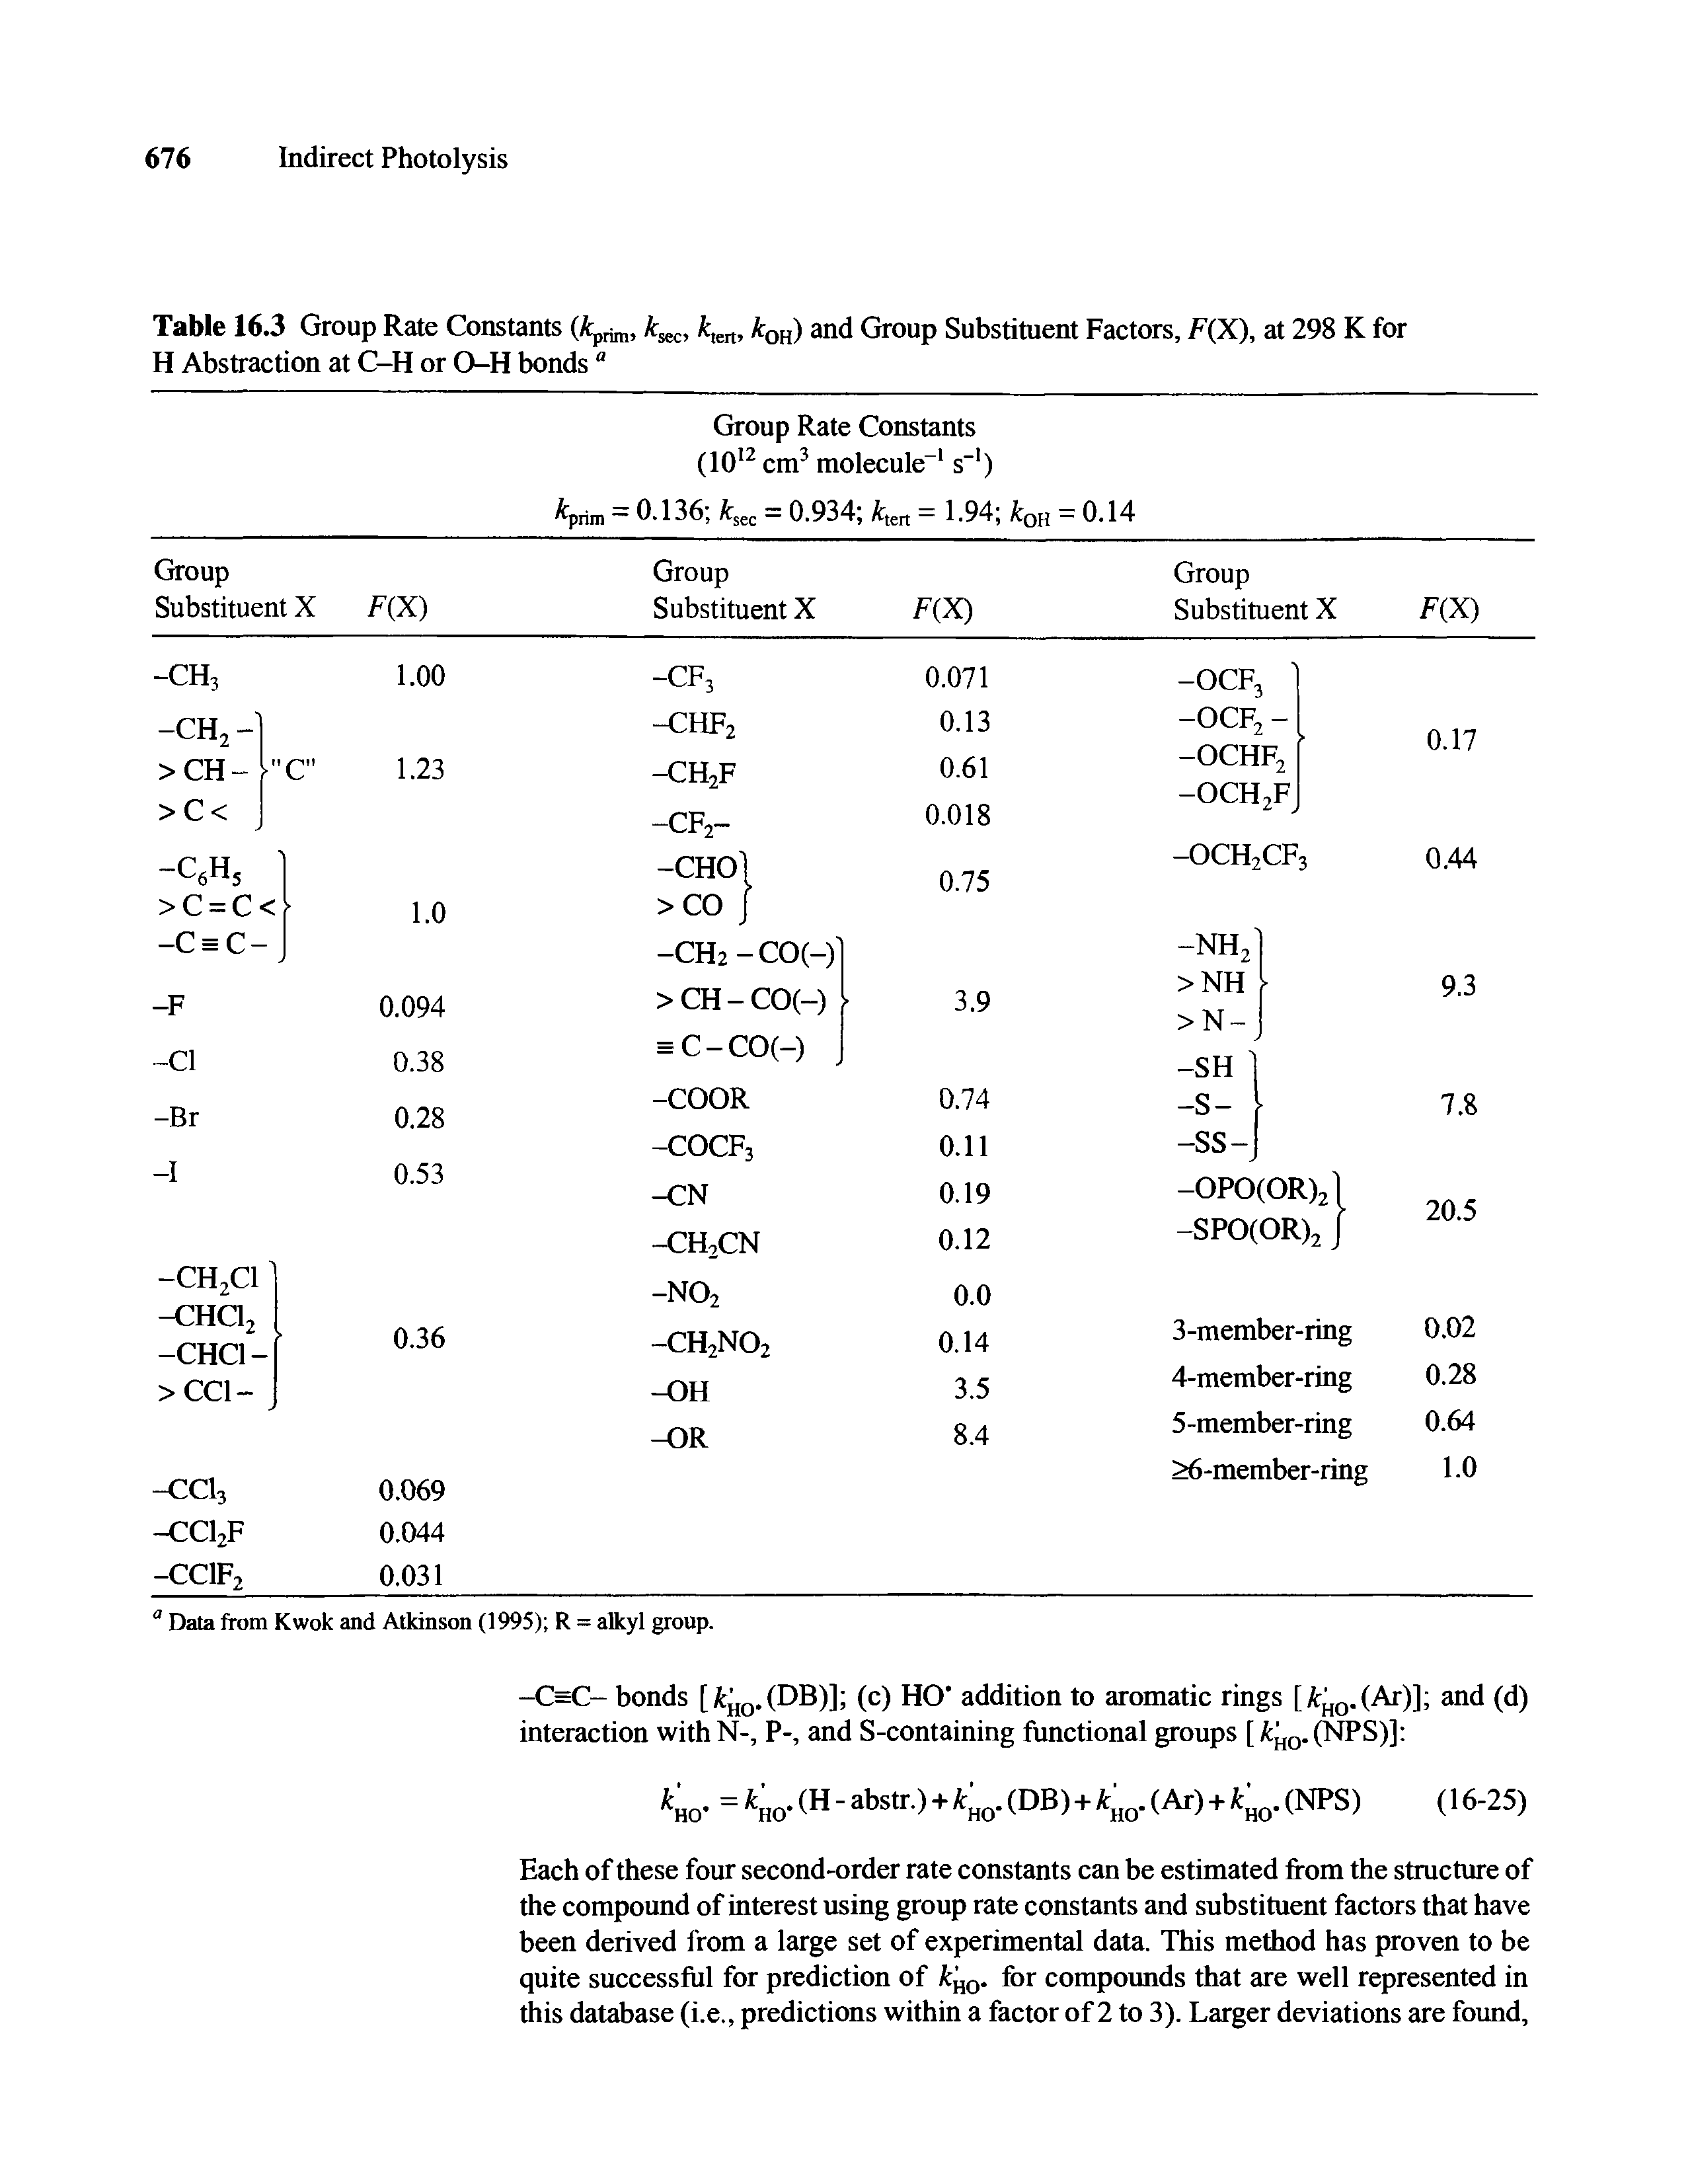 Table 16.3 Group Rate Constants (A prim, k, ktert, kOH) and Group Substituent Factors, F(X), at 298 K for H Abstraction at C-H or O-H bonds a...